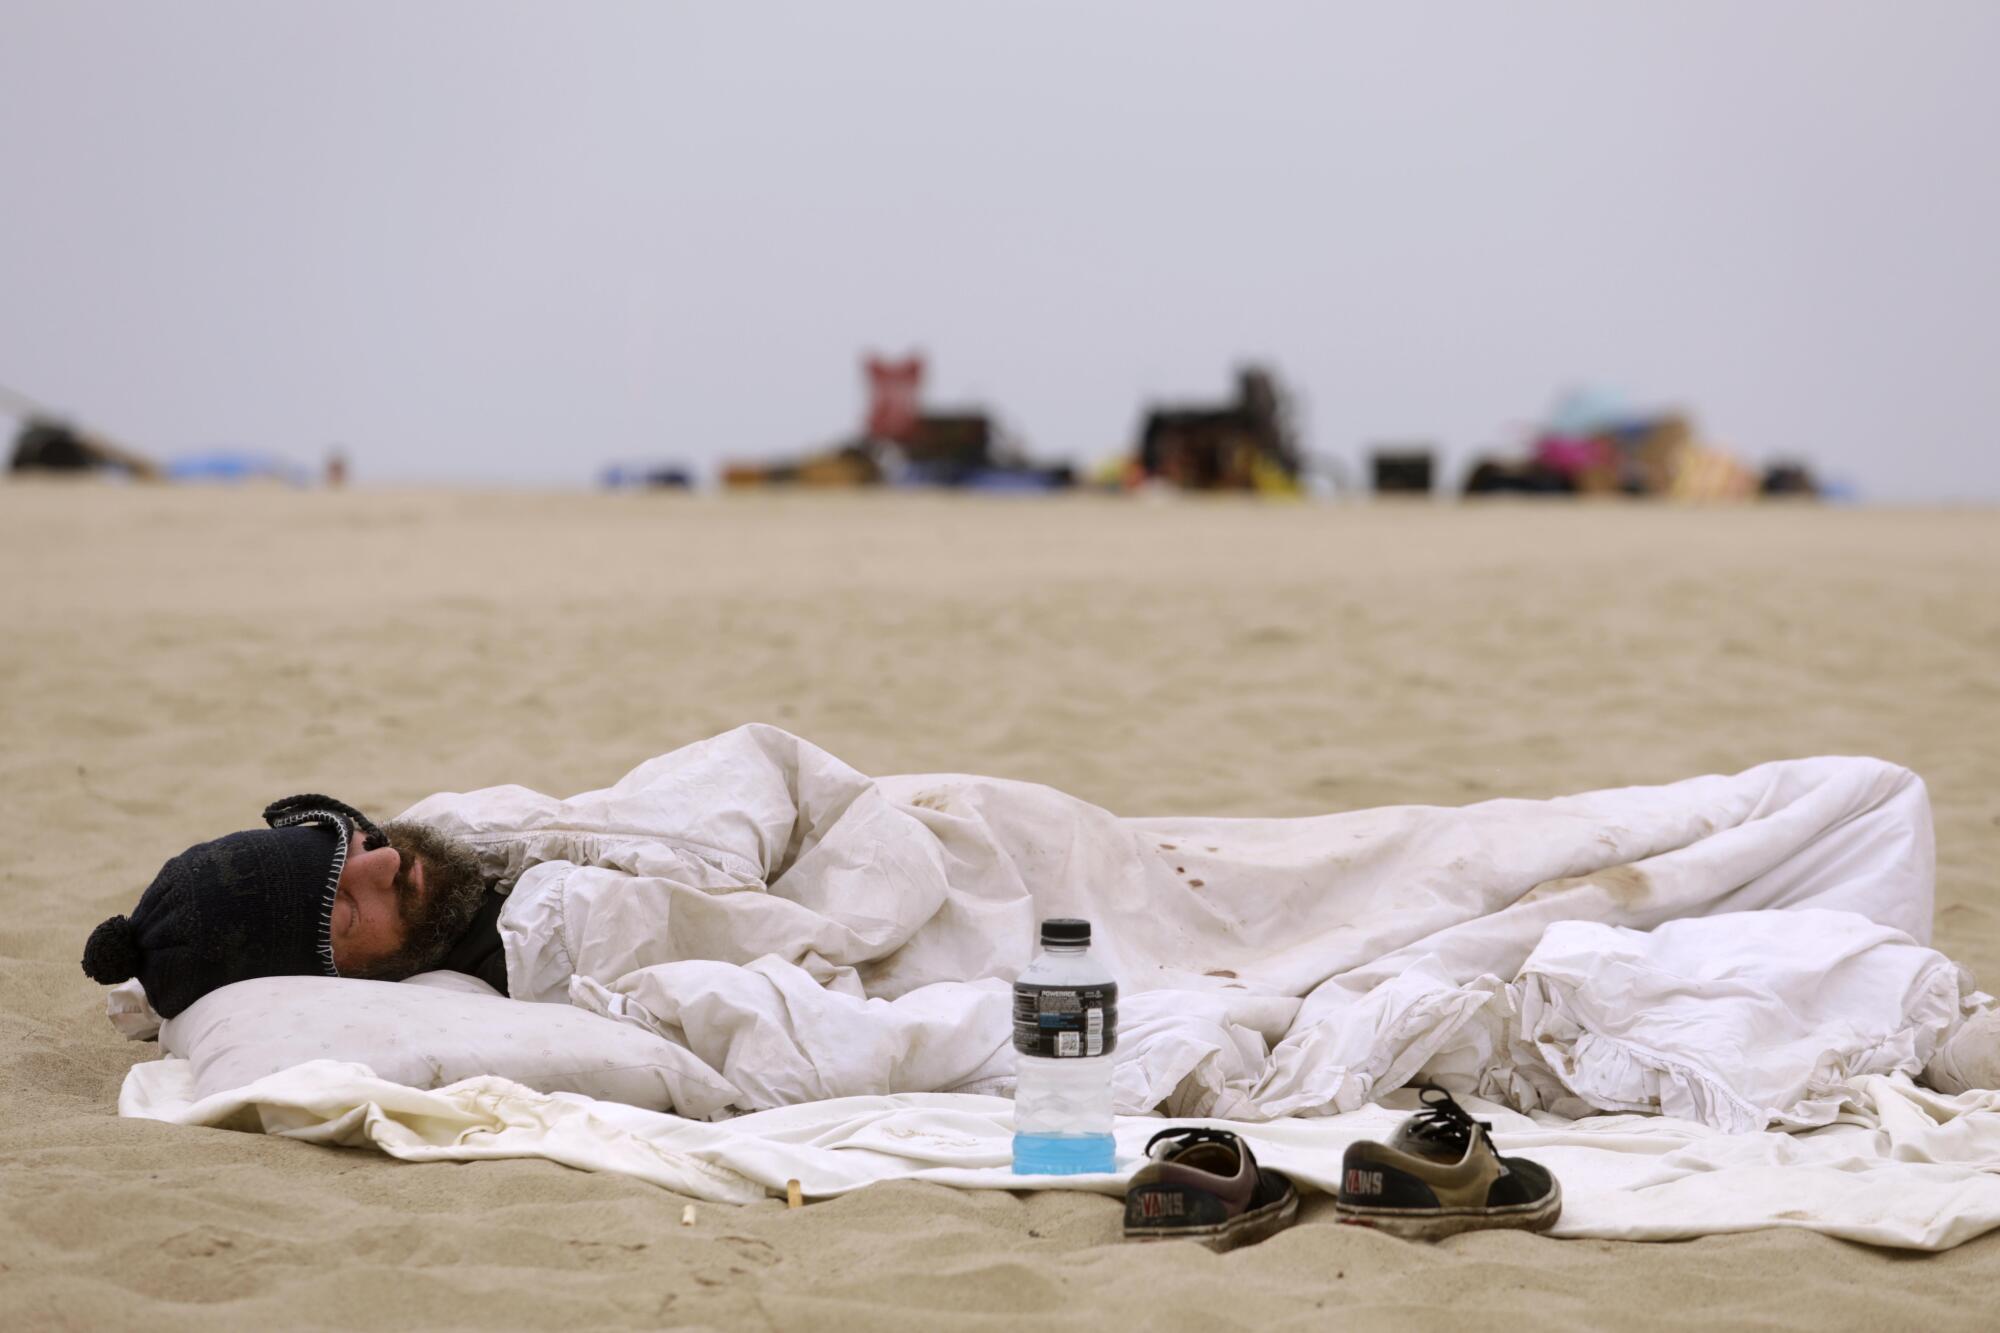 A homeless man sleeps on the beach before City of Los Angeles sanitation workers showed up to clear homeless encampments